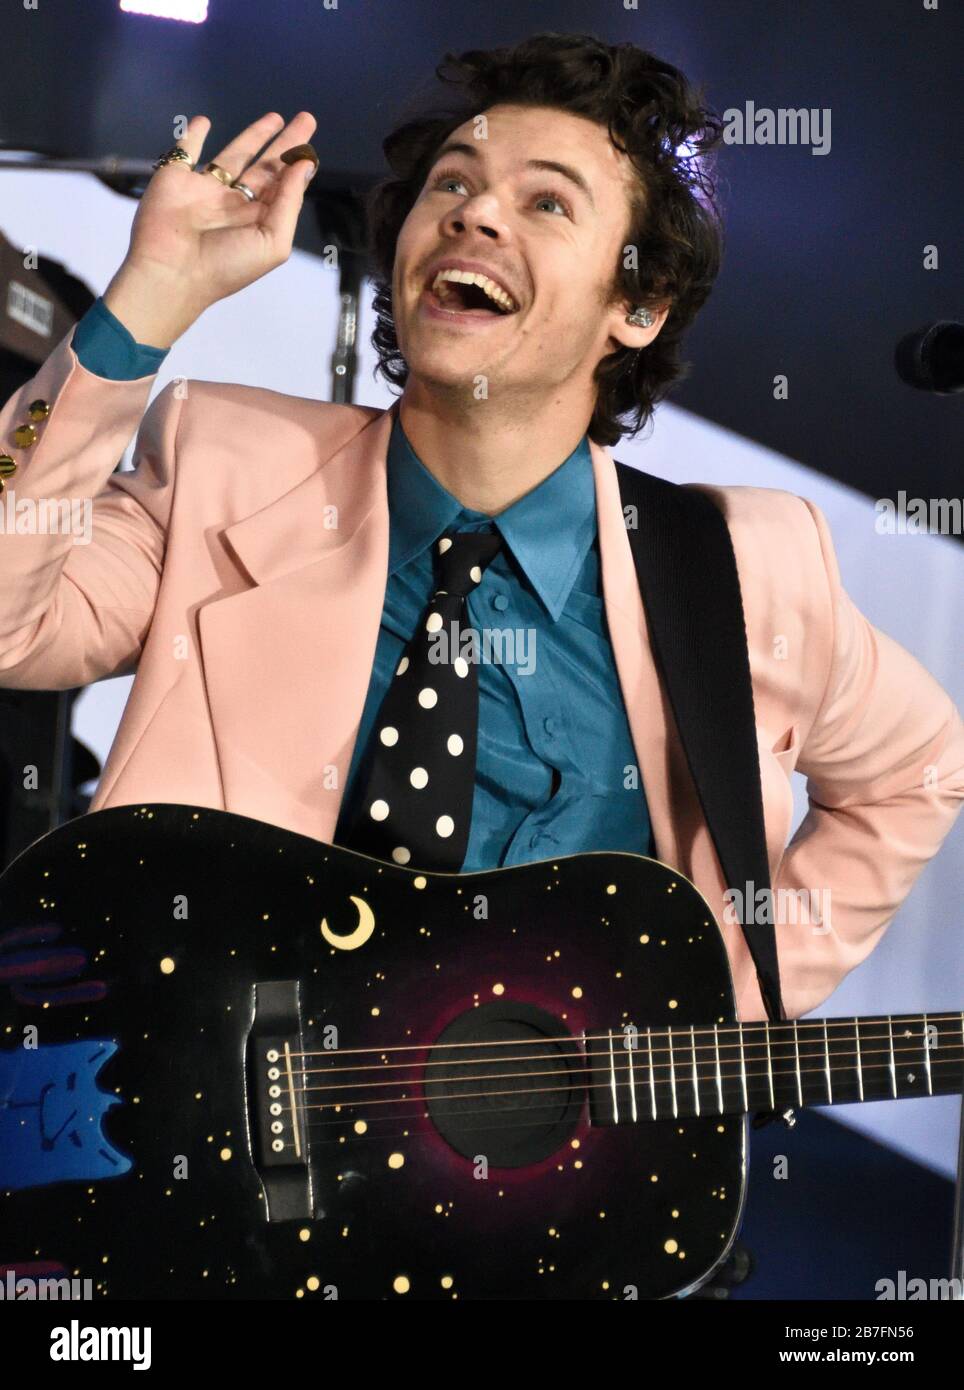 NEW YORK, NY, USA - FEBRUARY 26, 2020: English Singer-Songwriter Harry Styles Performs on NBC's 'Today' Show Concert Series at Rockefeller Plaza. Stock Photo